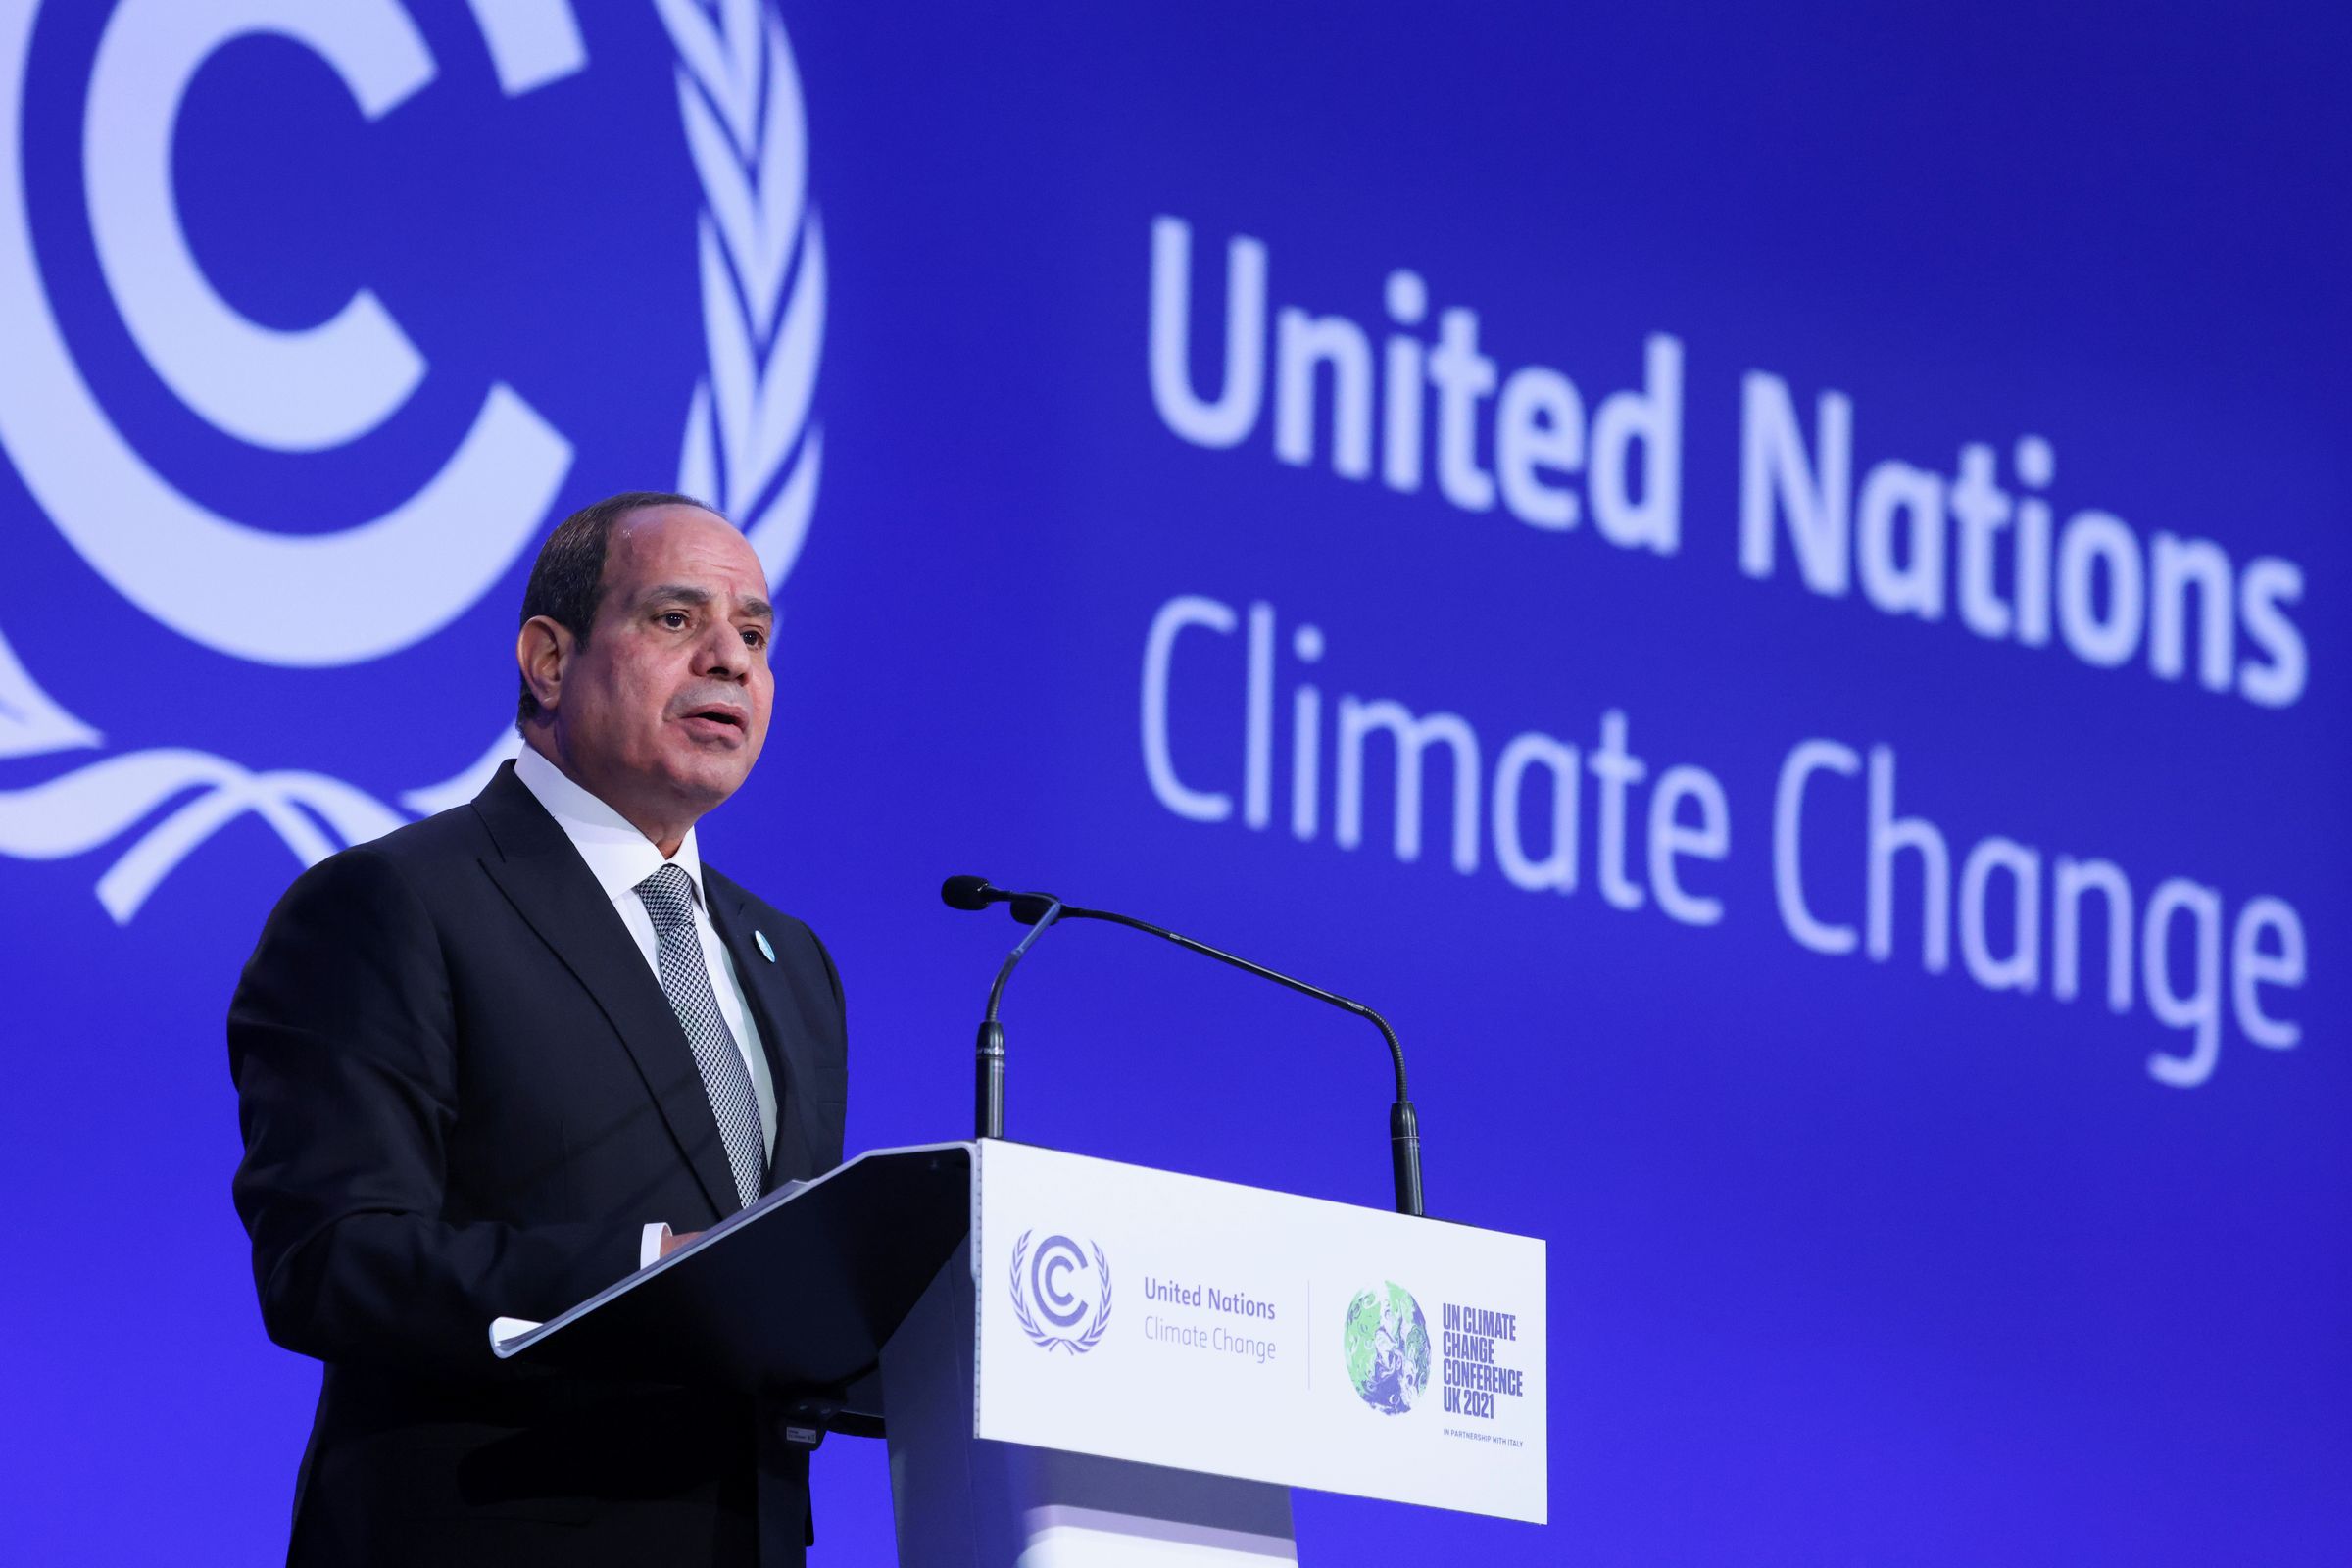 Egypt President Abdel Fattah al-Sisi speaking during the UN Climate Change Conference COP26